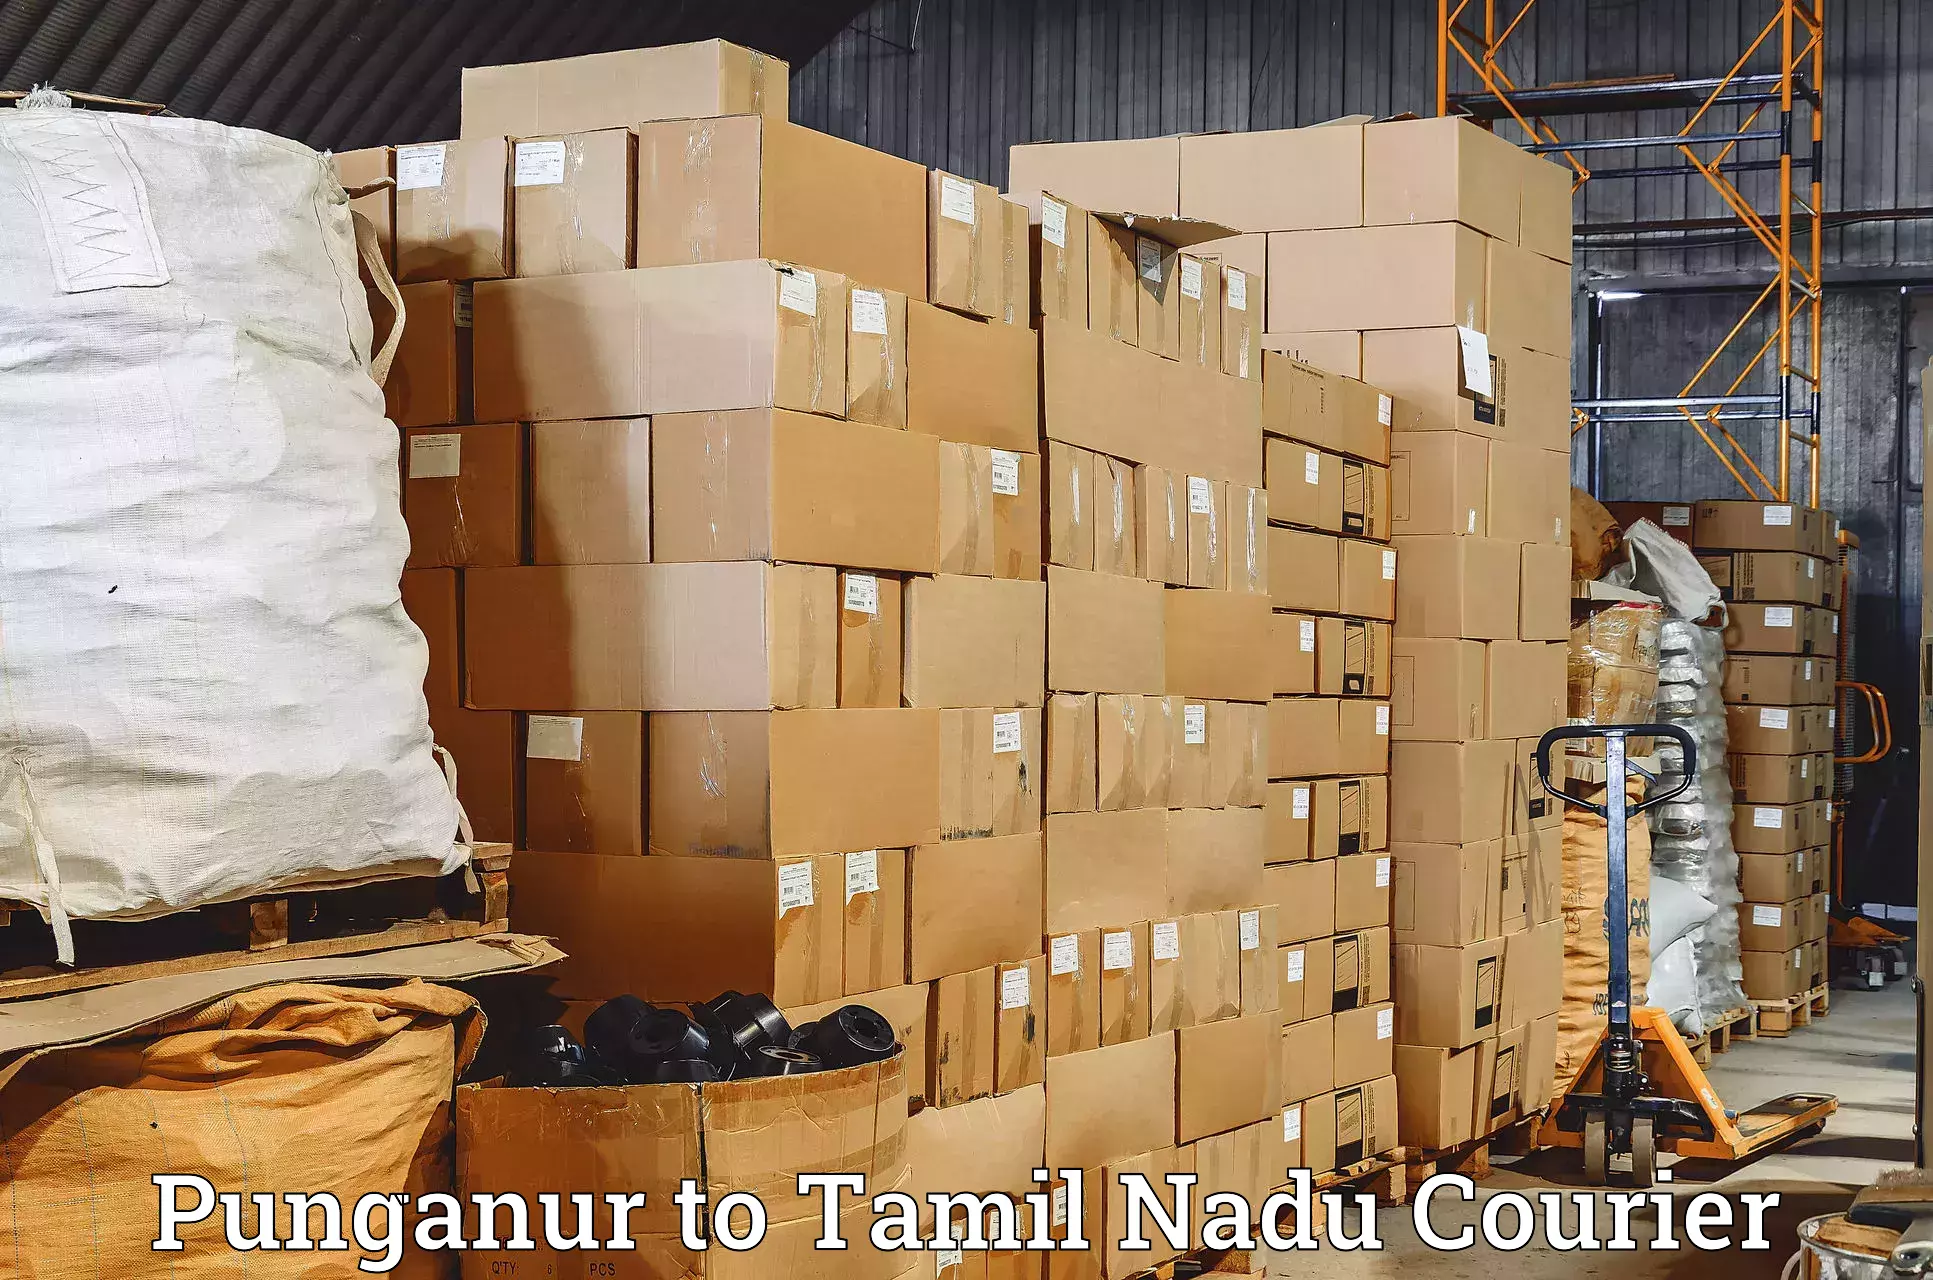 Professional parcel services in Punganur to Uthangarai